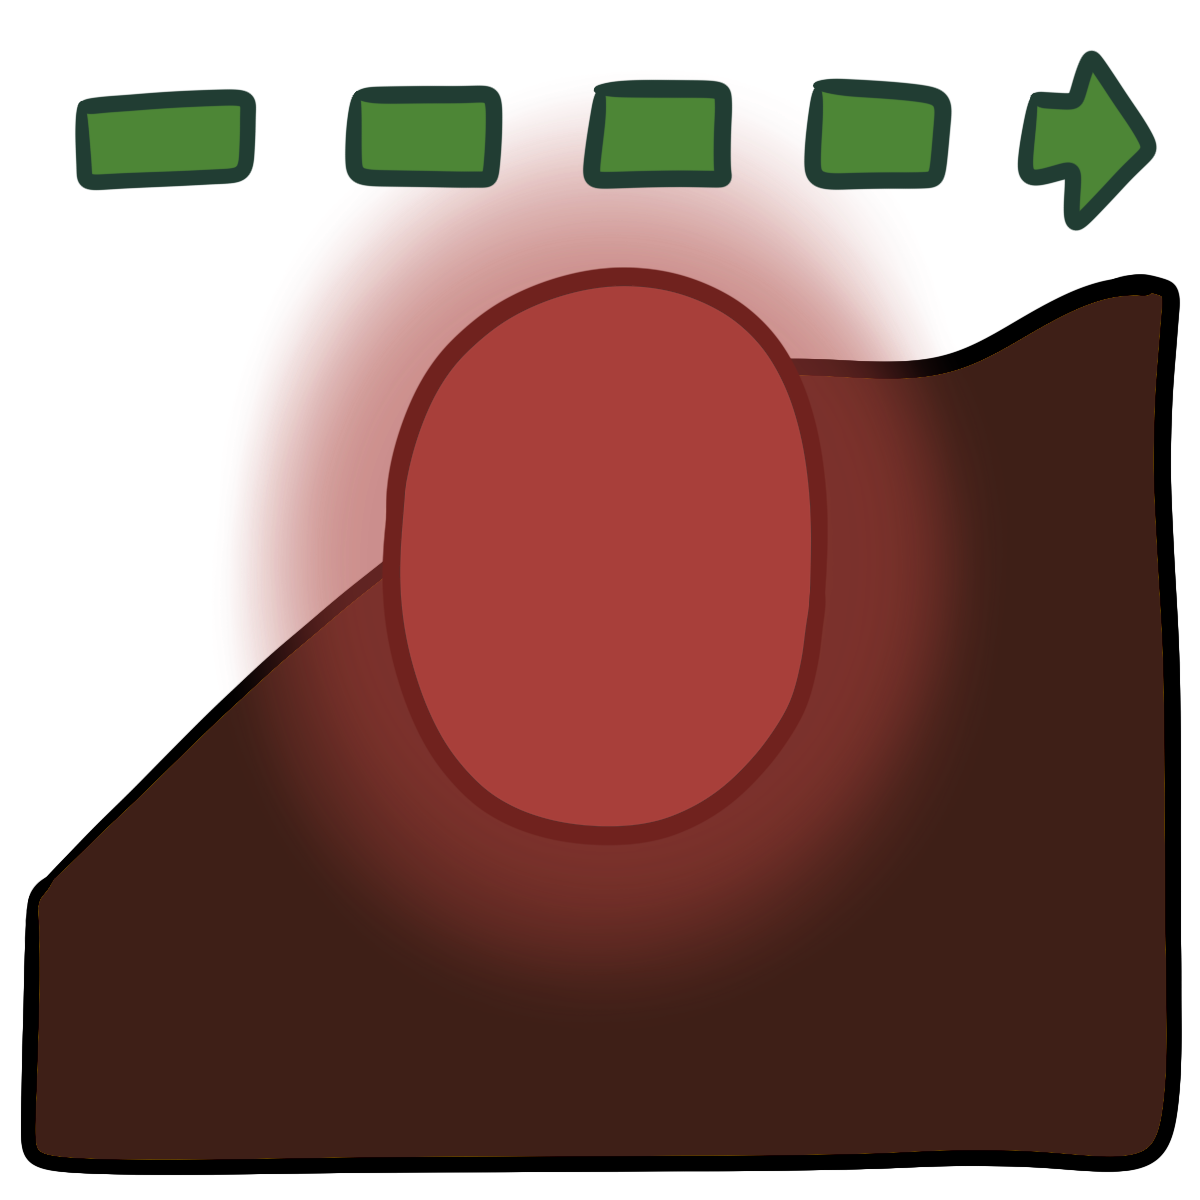 A dashed line green arrow pointing right. There is a glowing red oval in the center. Curved dark brown skin fills the bottom half of the background.